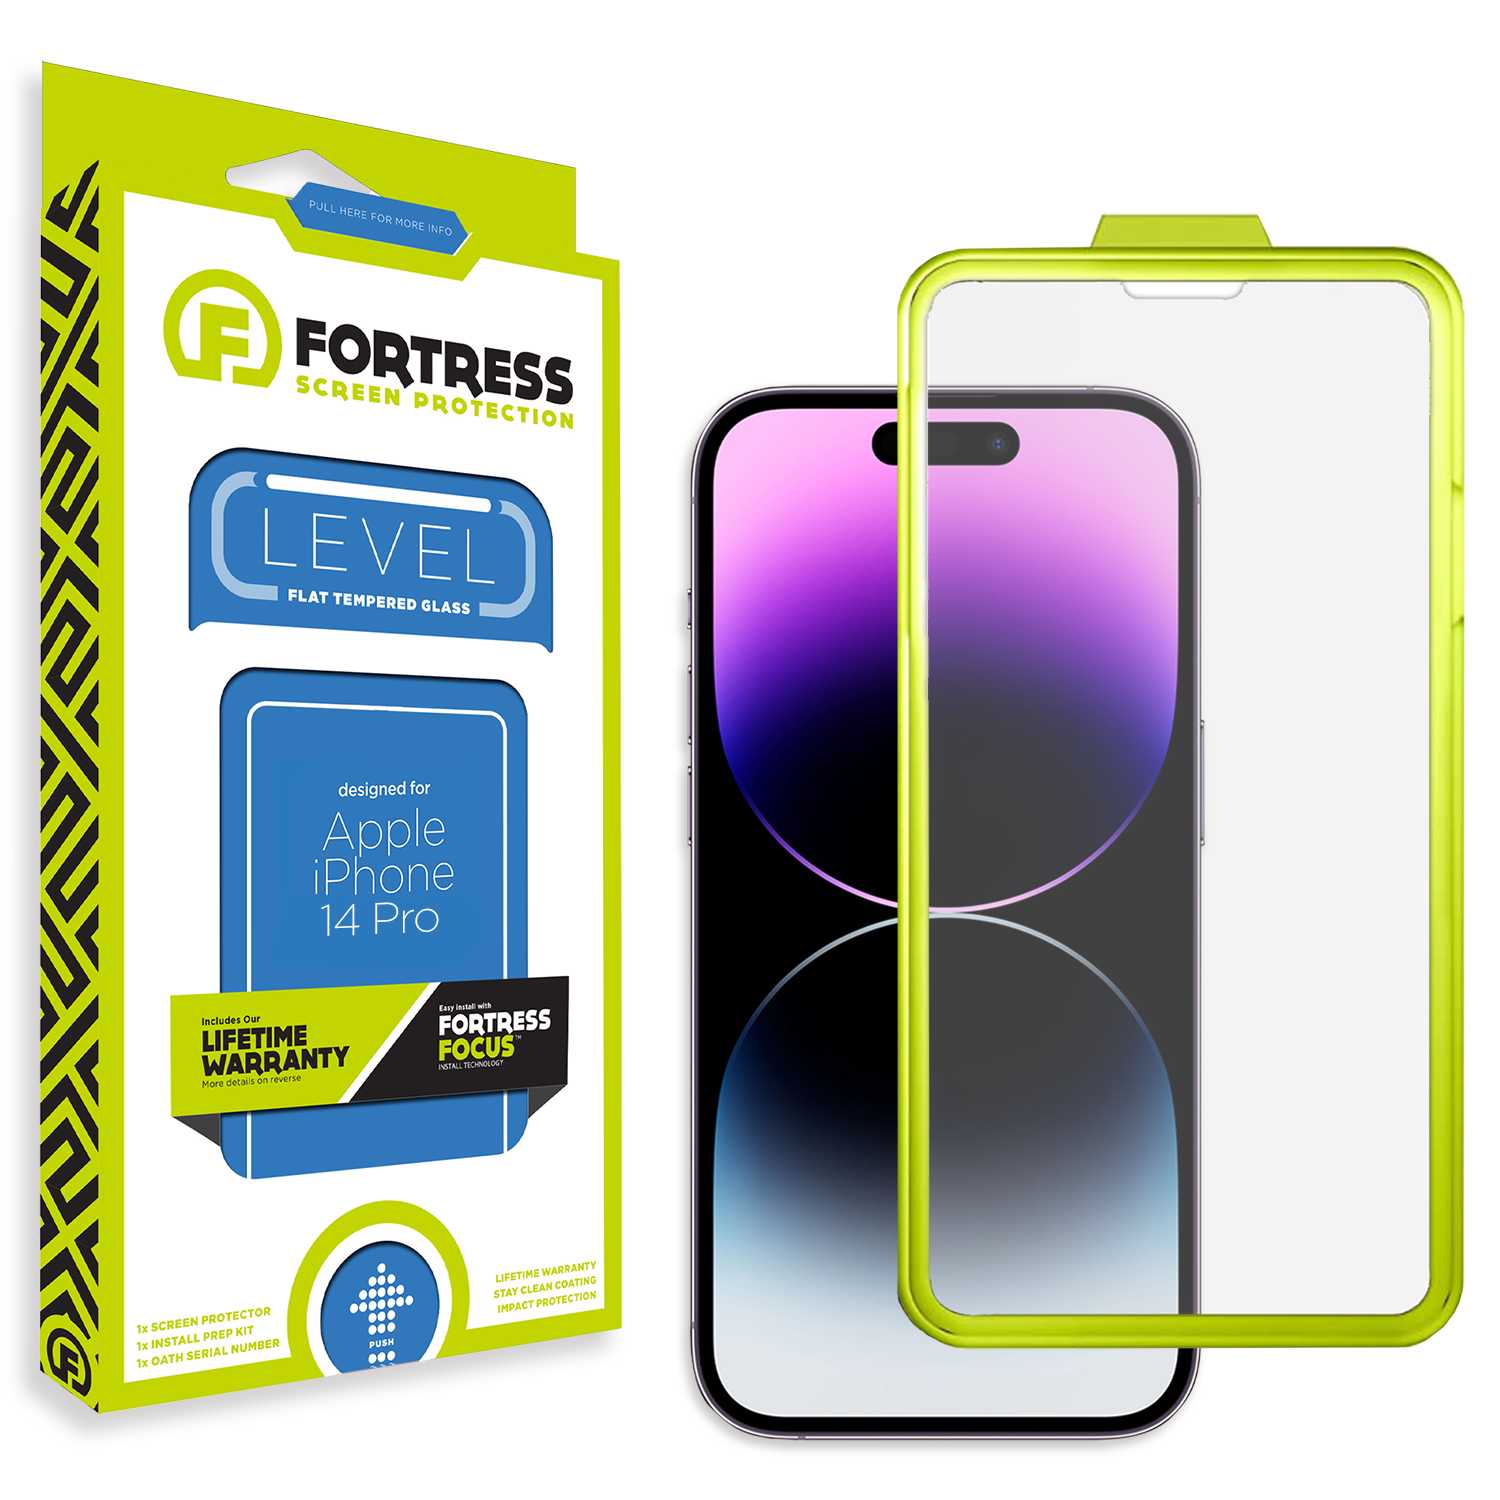 Fortress iPhone 14 Pro Screen Protector $0CoverageInstallTool Scooch Screen Protector